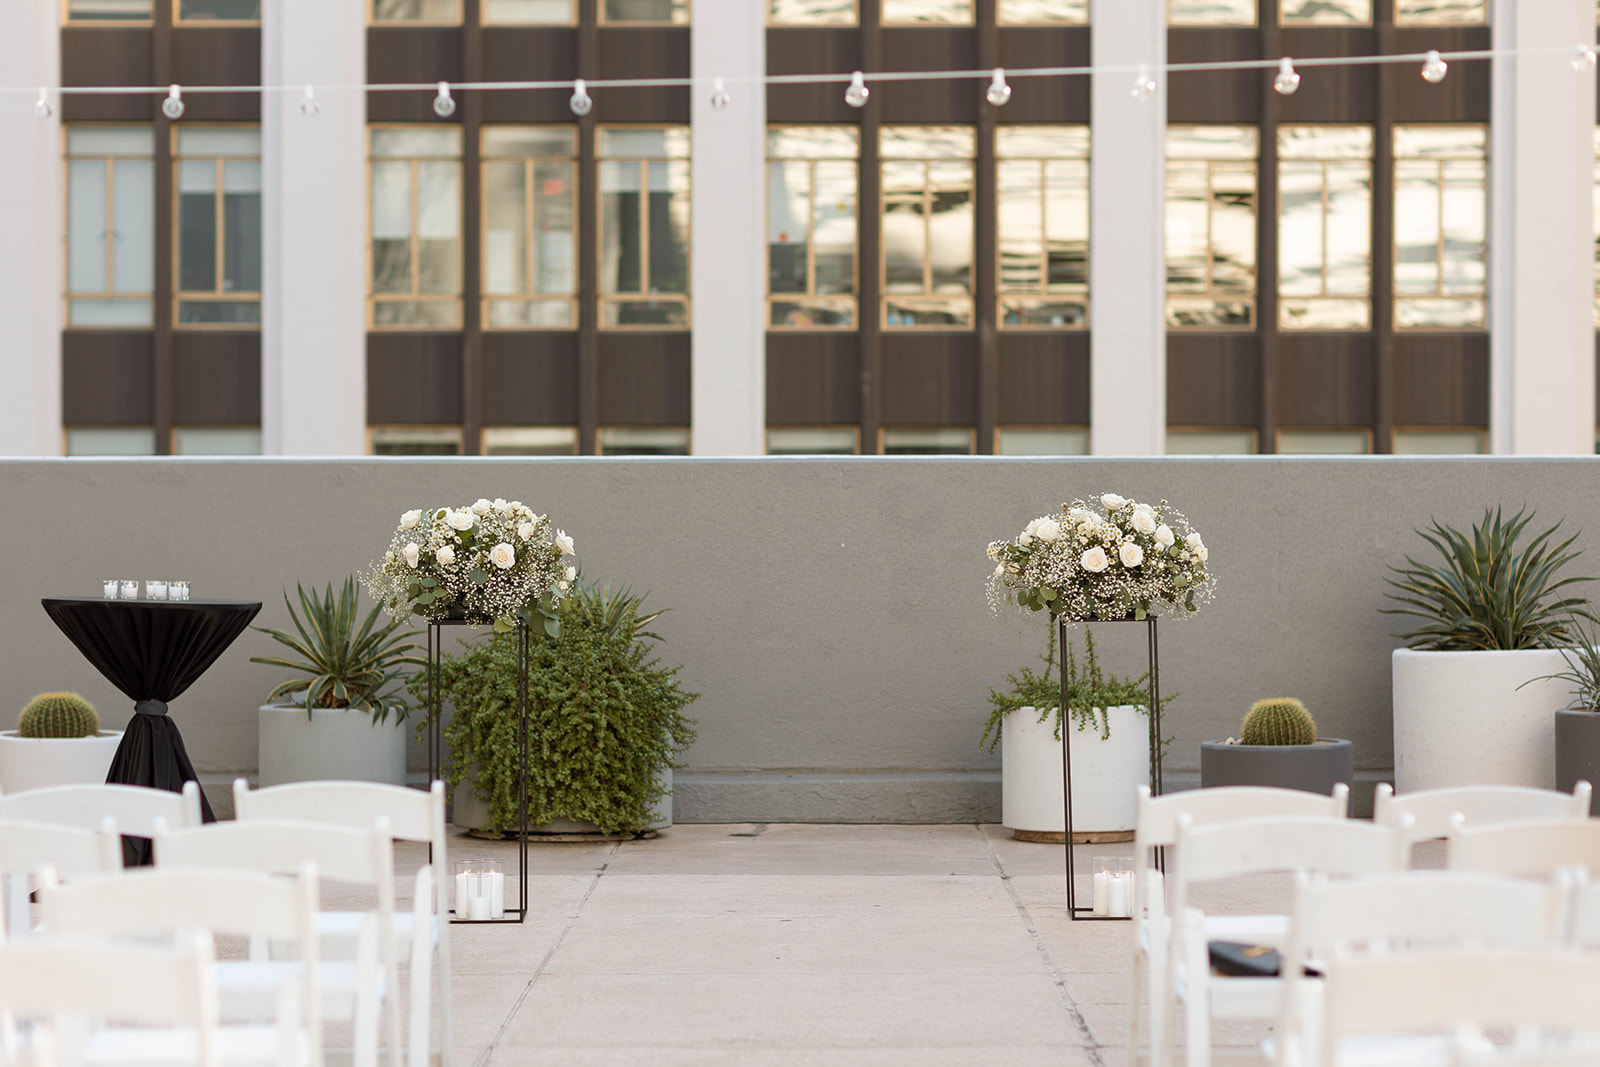 Ceremony set up of downtown wedding venue in phoenix, arizona. Features two floral arrangements with white flowers and baby's breath on stands.